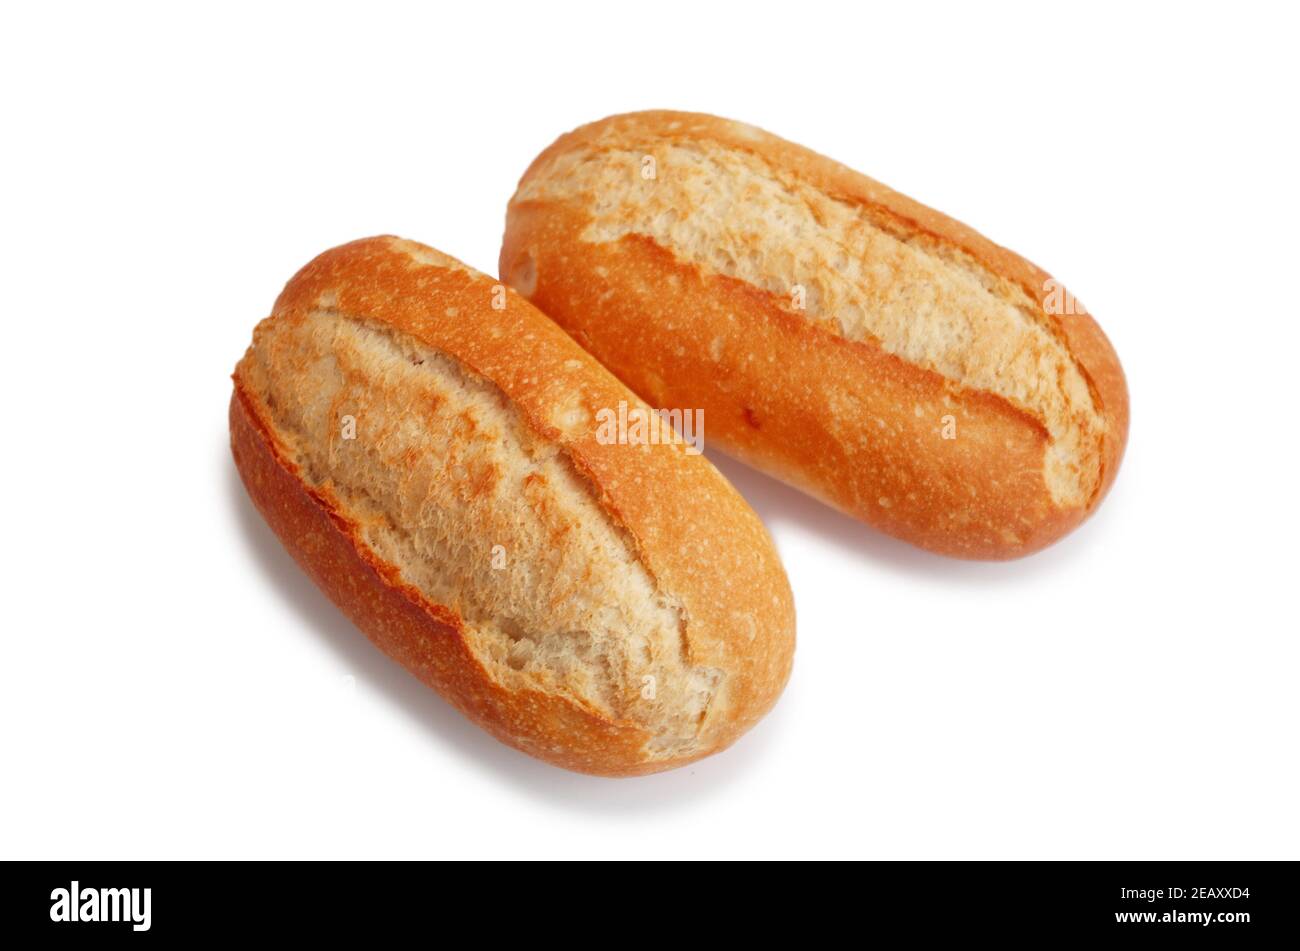 Two fresh crusty mini baguettes isolated on white bacground. Small